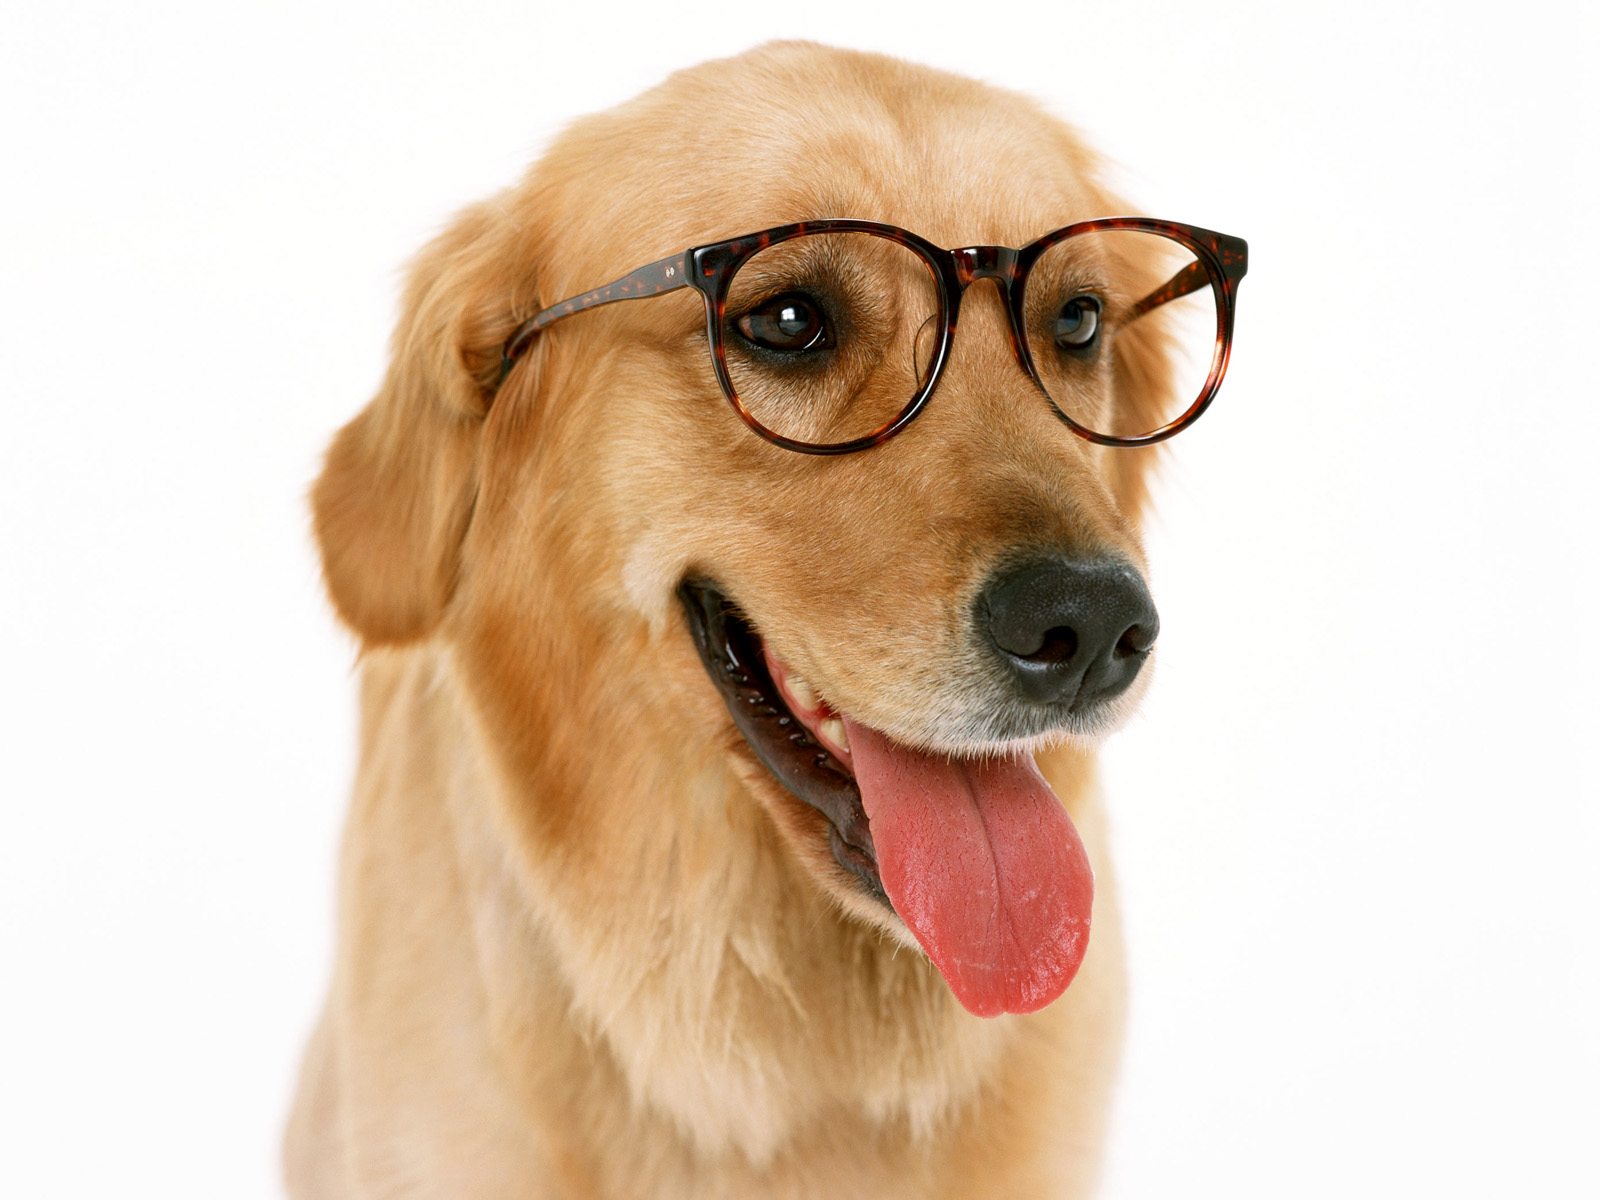 Wearing Glasses Dog Wallpaper And Image